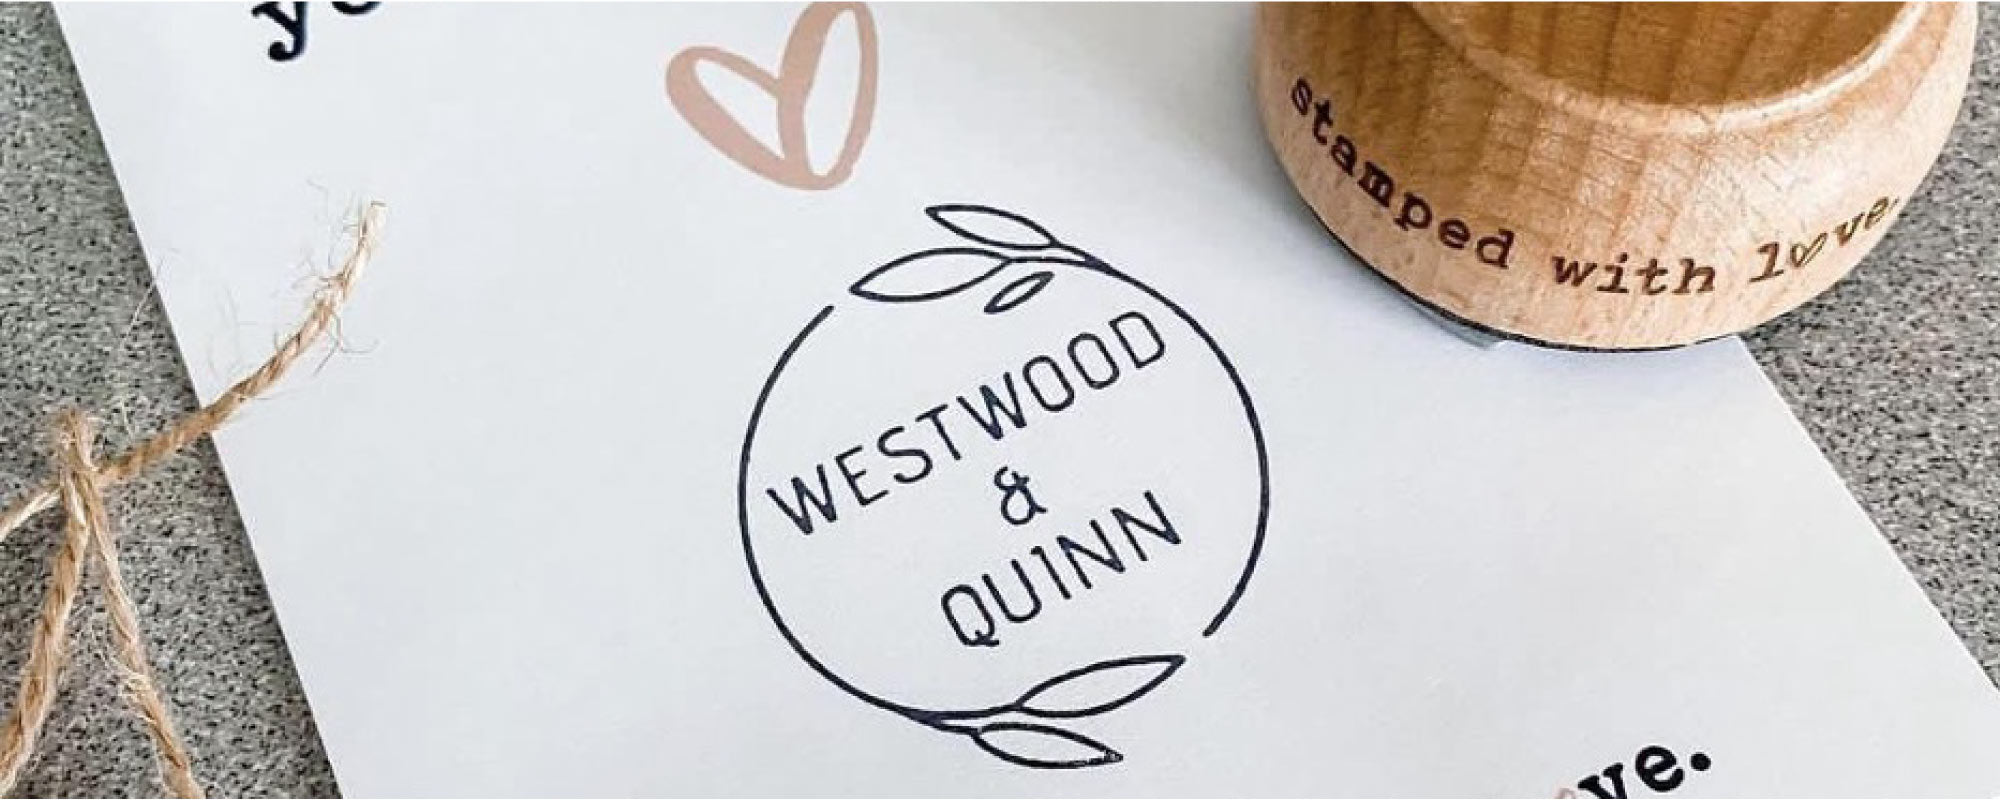 Made with Love with Custom Logo Business Stamp - HC Brands